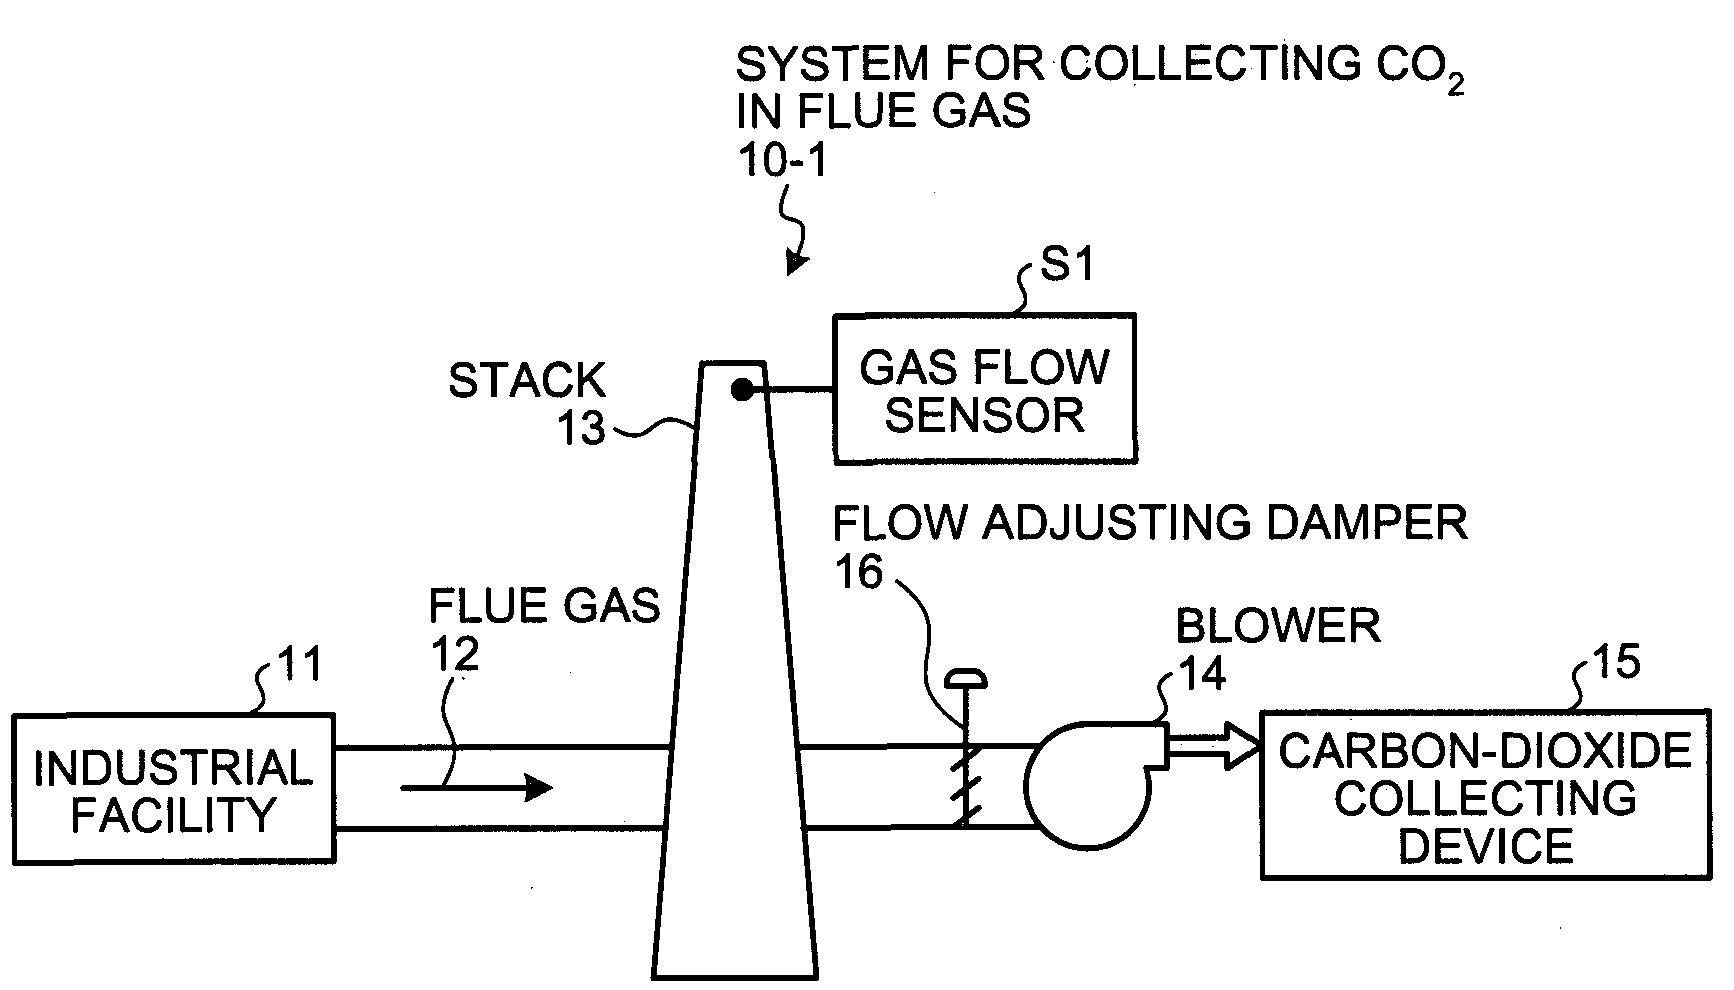 System for collecting carbon dioxide in flue gas